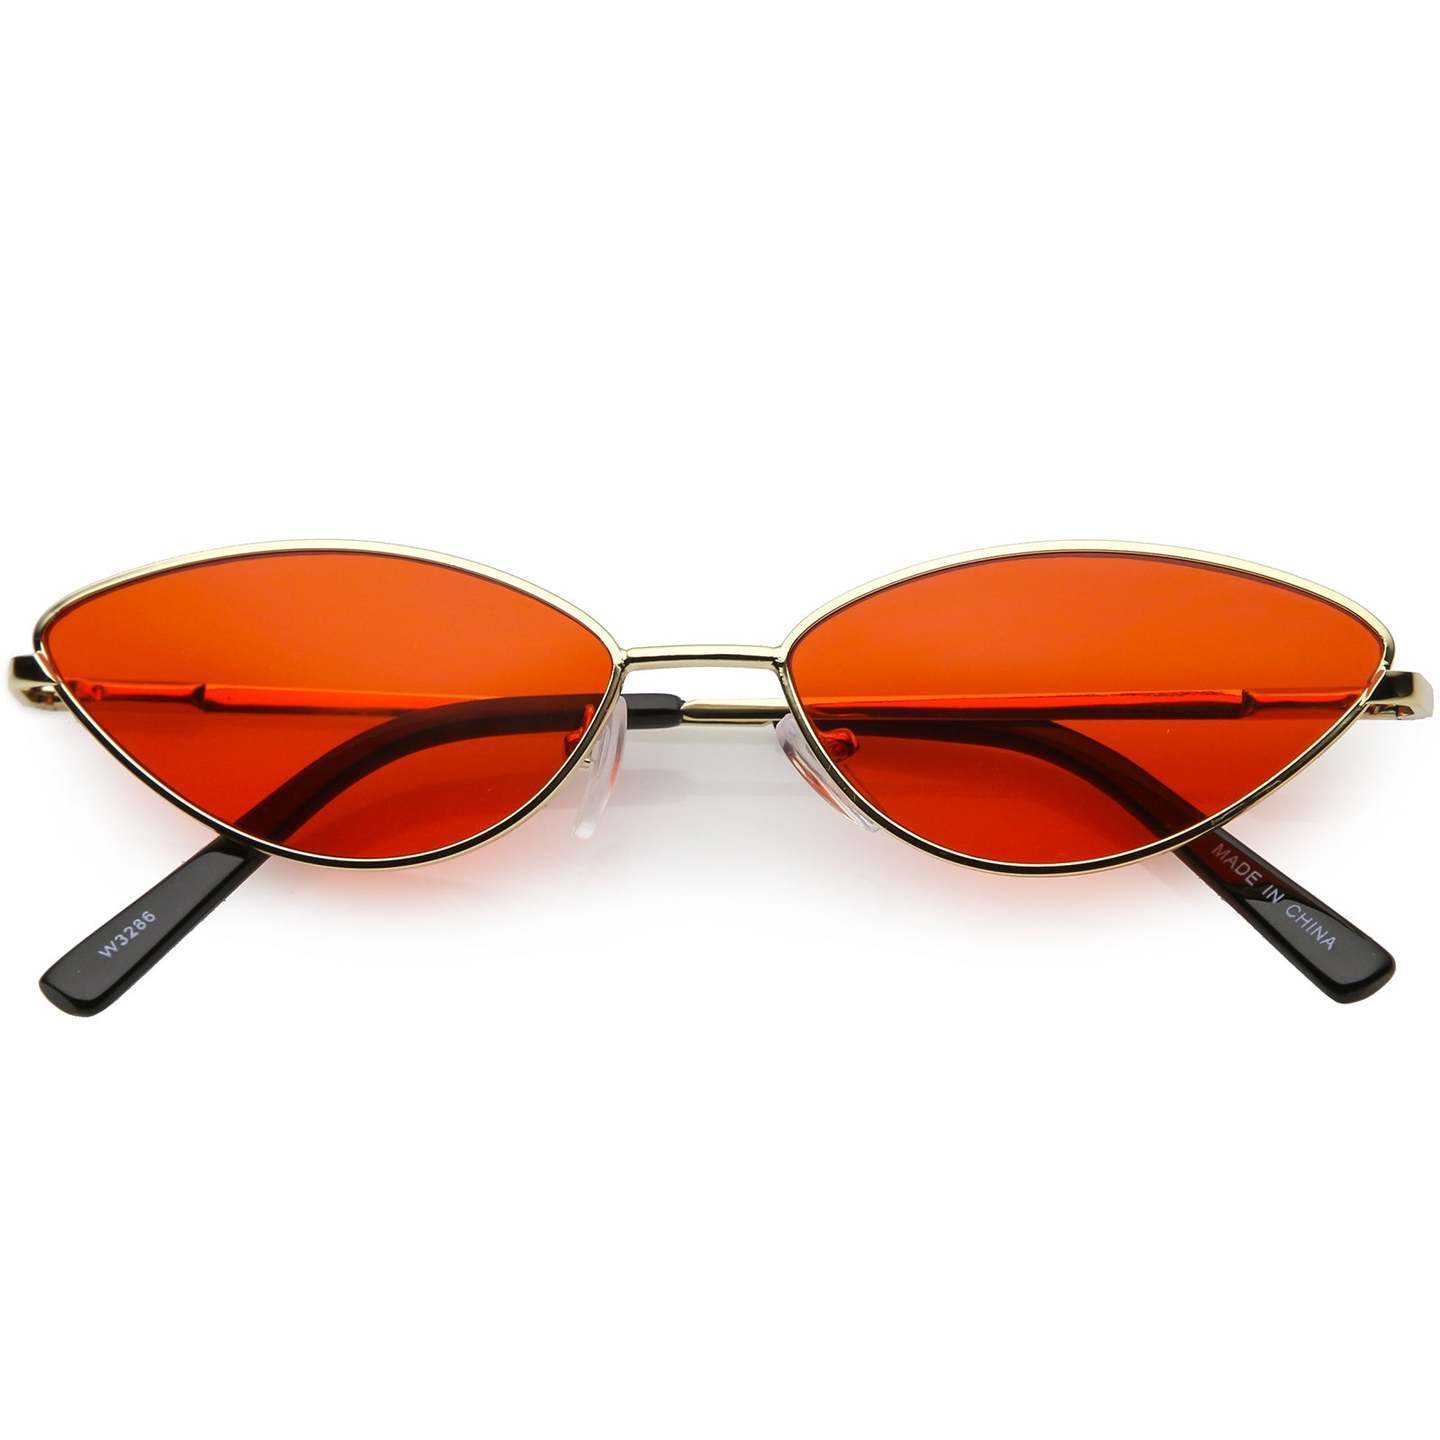 RETRO SMALL METAL CAT EYE SUNGLASSES FOR WOMEN RED COLOR TINTED LENS